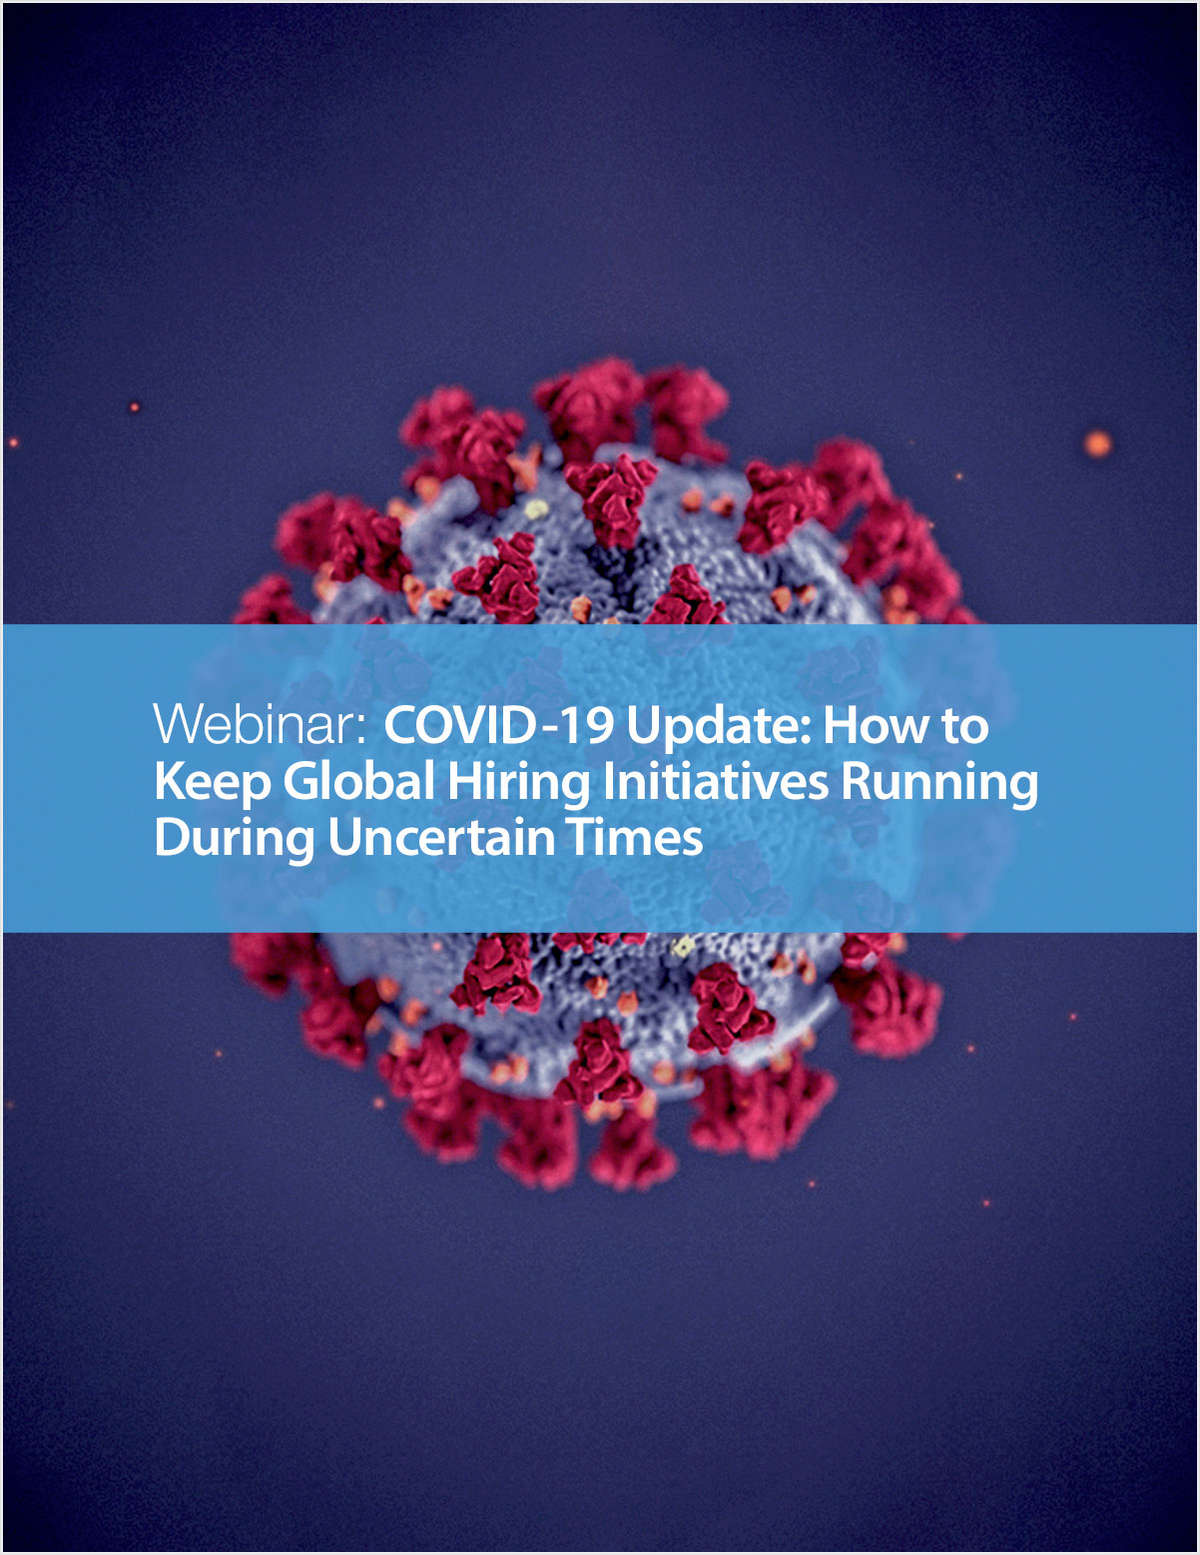 COVID-19 Update: How to Keep Global Hiring Initiatives Running During Uncertain Times